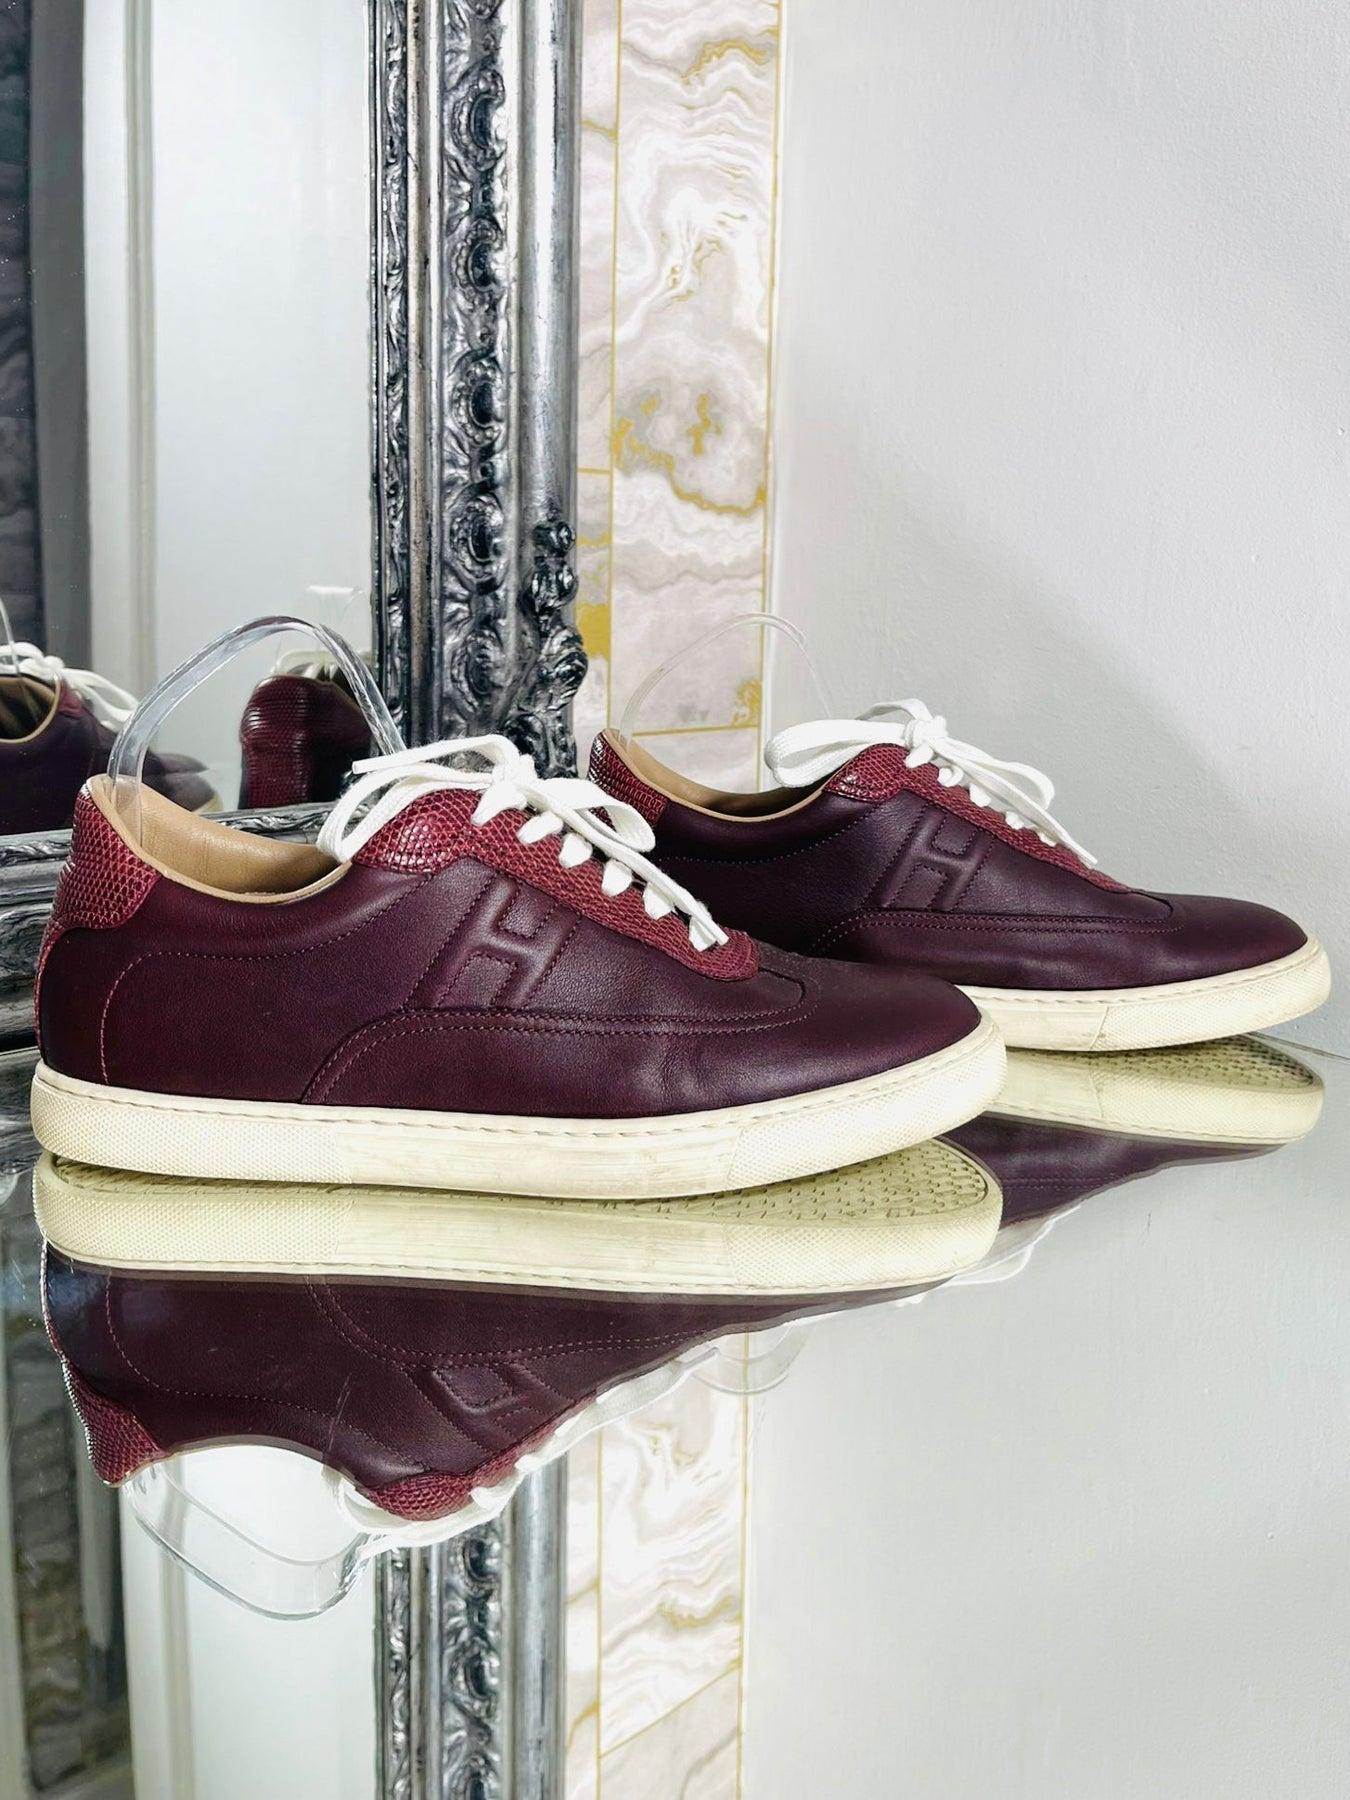 Hermes Leather & Lizard Skin 'H' Sneakers In Excellent Condition For Sale In London, GB